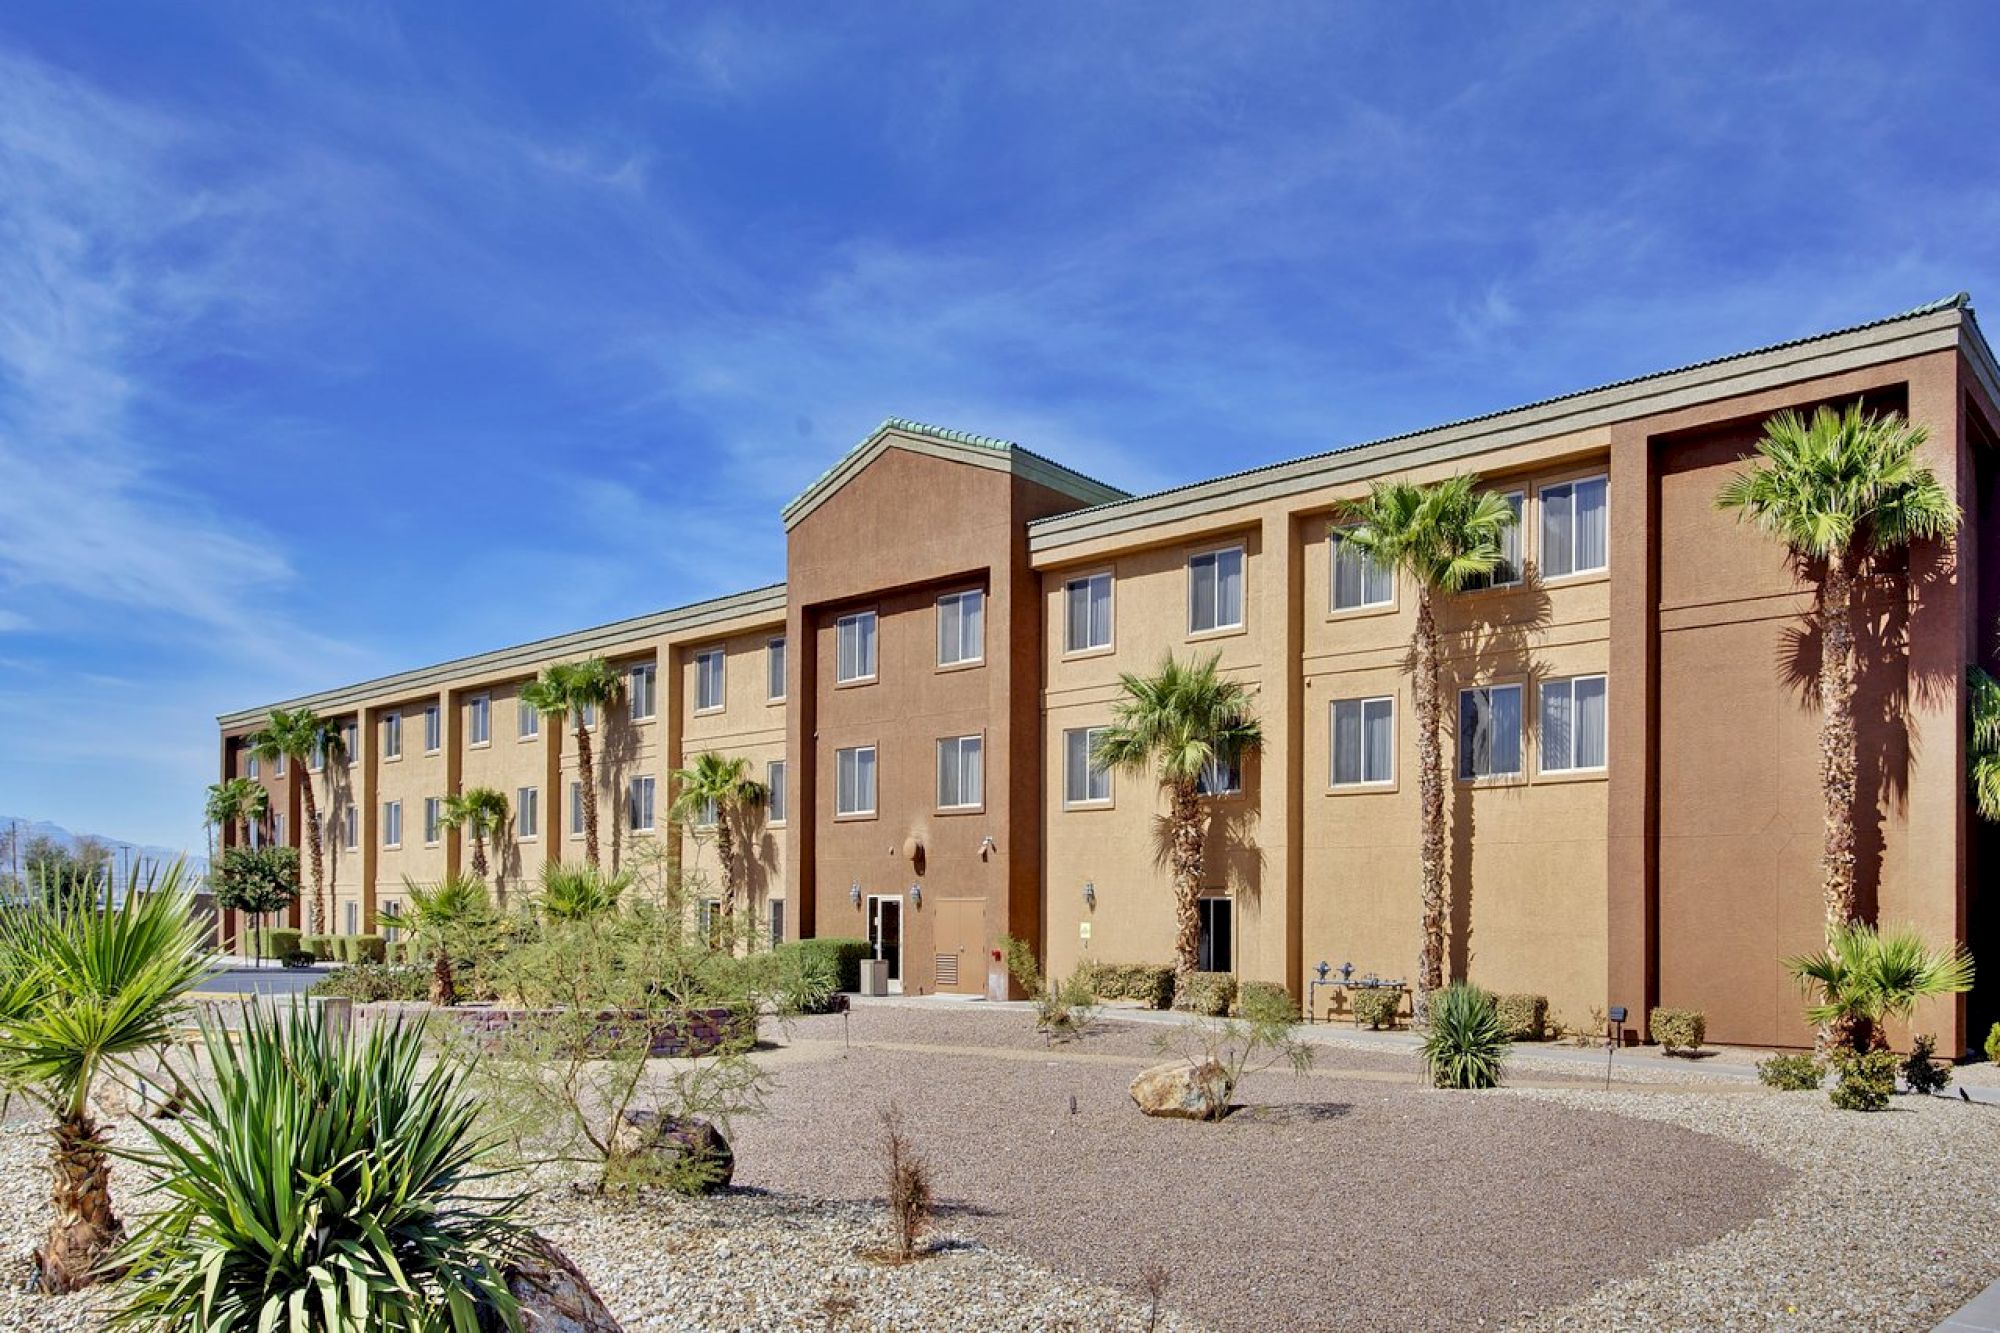 A three-story beige building with palm trees and desert landscaping in front, under a clear blue sky.